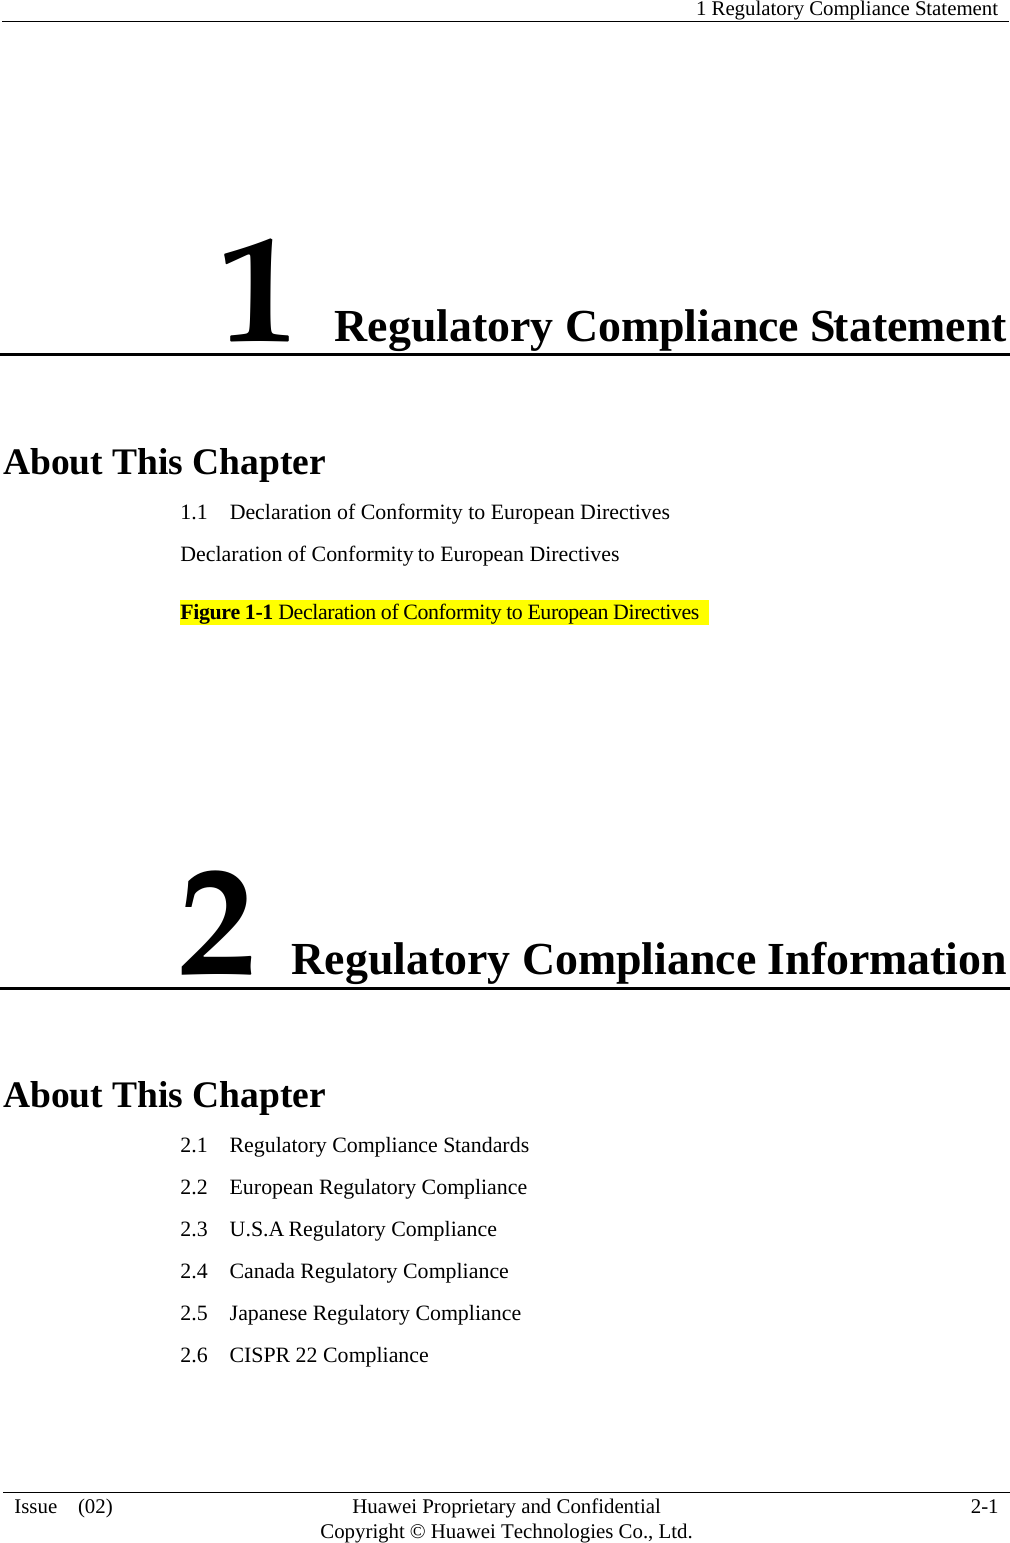   1 Regulatory Compliance Statement   Issue  (02)  Huawei Proprietary and Confidential     Copyright © Huawei Technologies Co., Ltd.  2-1  1 Regulatory Compliance Statement About This Chapter 1.1    Declaration of Conformity to European Directives Declaration of Conformity to European Directives Figure 1-1 Declaration of Conformity to European Directives    2 Regulatory Compliance Information About This Chapter 2.1    Regulatory Compliance Standards 2.2  European Regulatory Compliance 2.3  U.S.A Regulatory Compliance 2.4  Canada Regulatory Compliance 2.5  Japanese Regulatory Compliance 2.6    CISPR 22 Compliance 